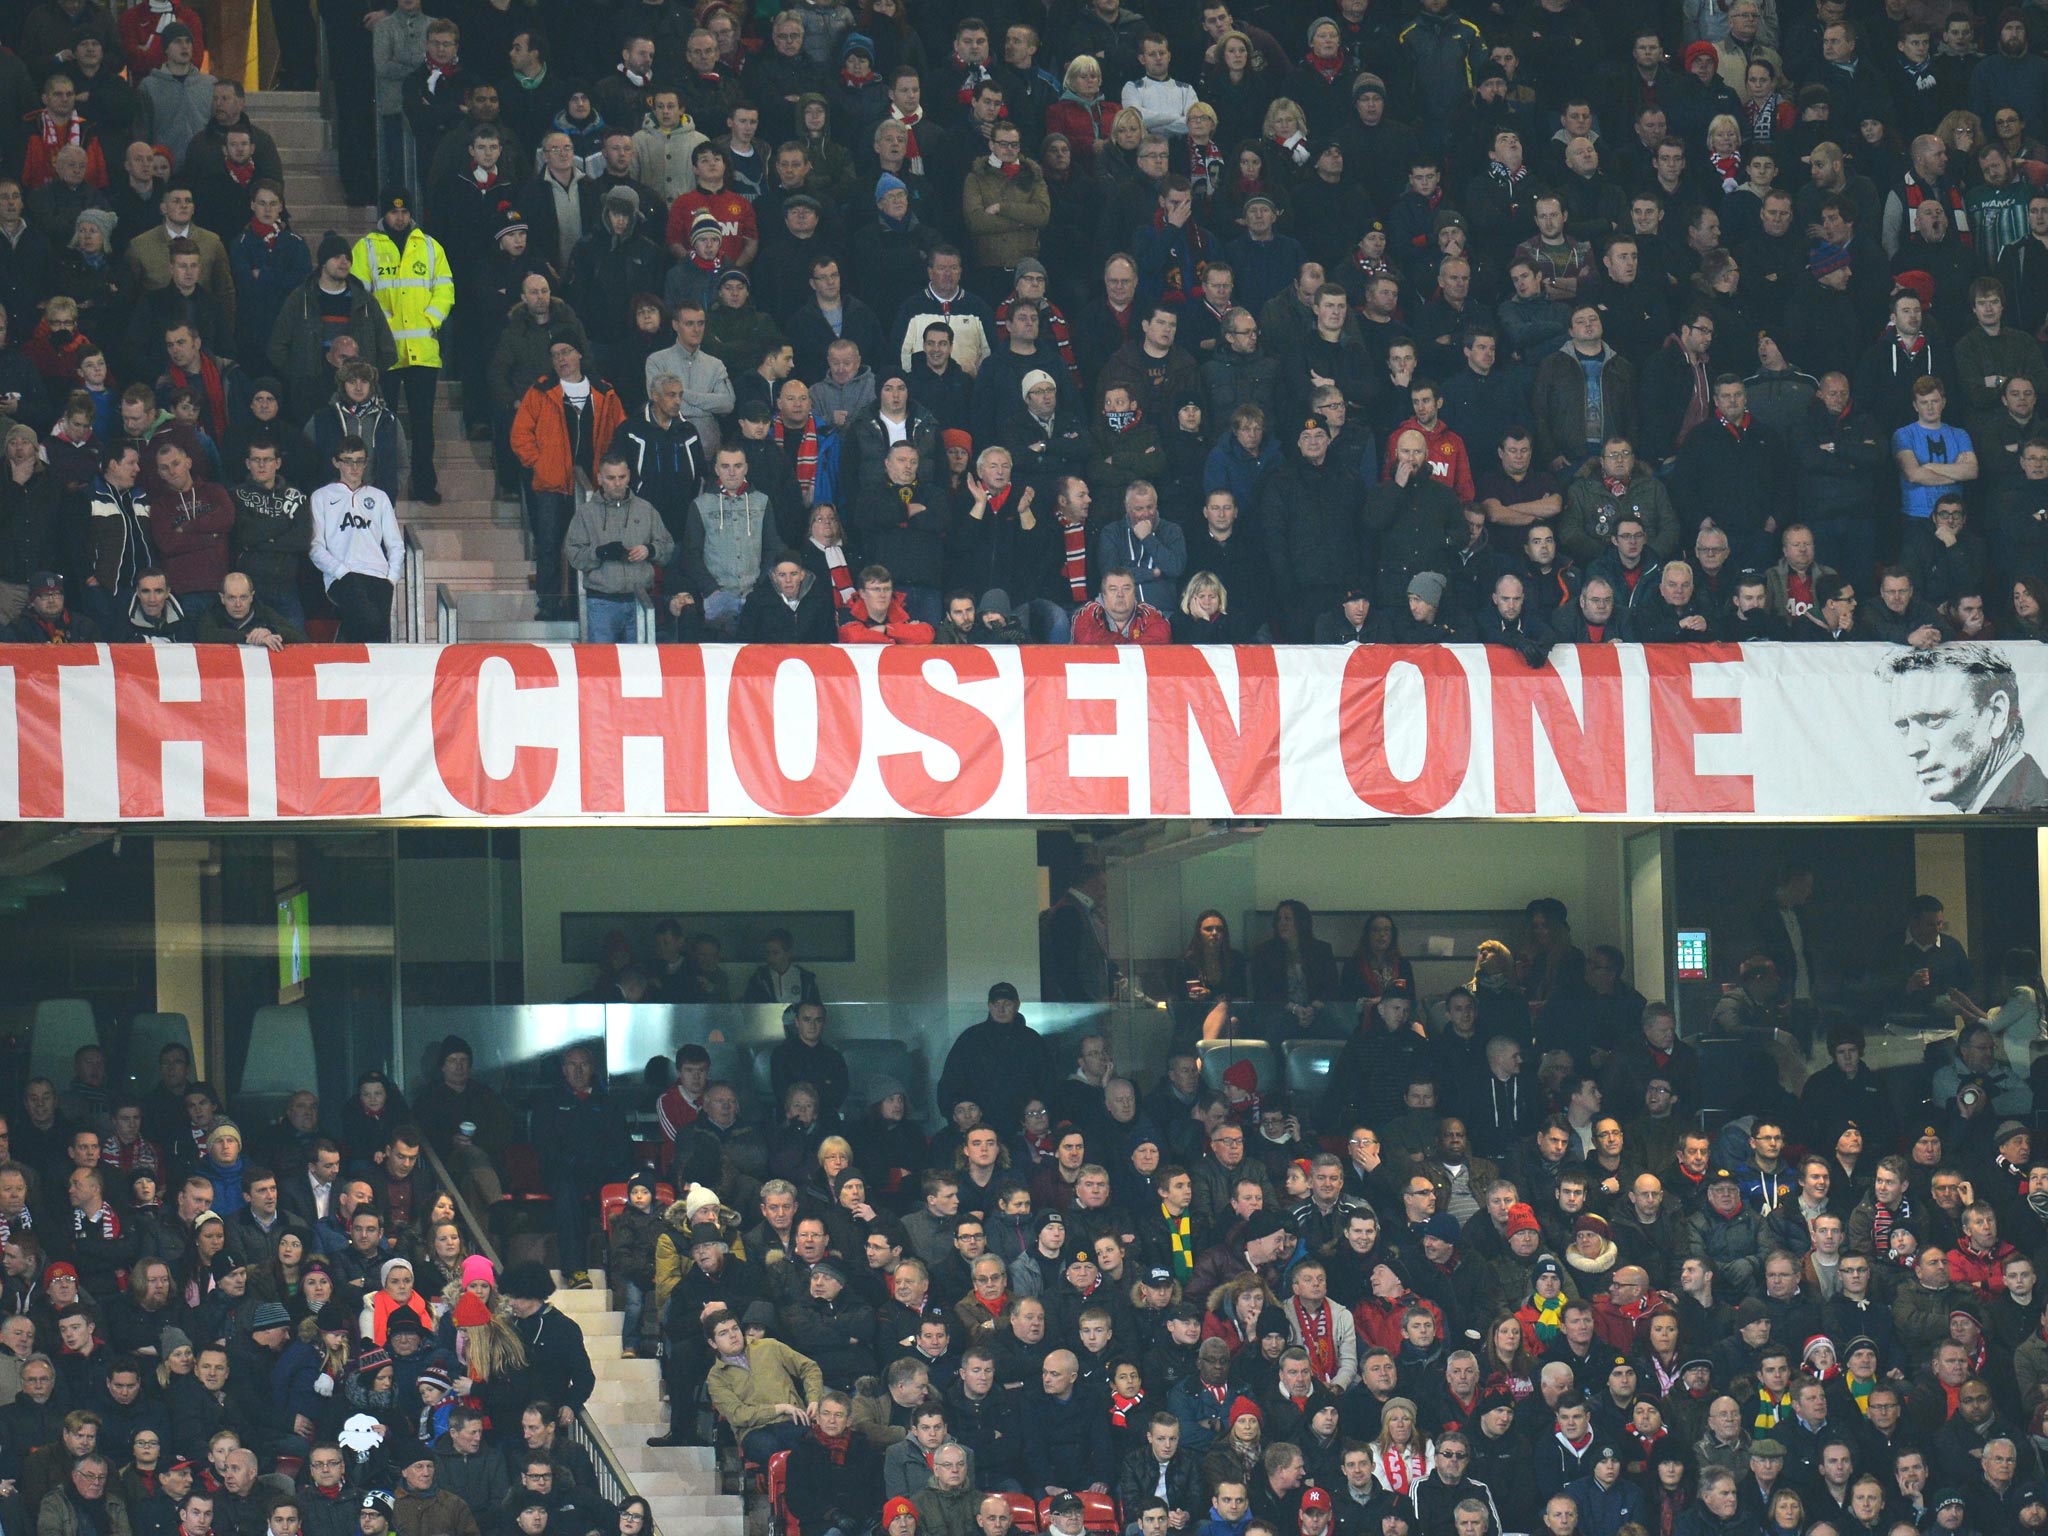 Fans have questioned whether the ‘Chosen One’ banner at Old Trafford should stay